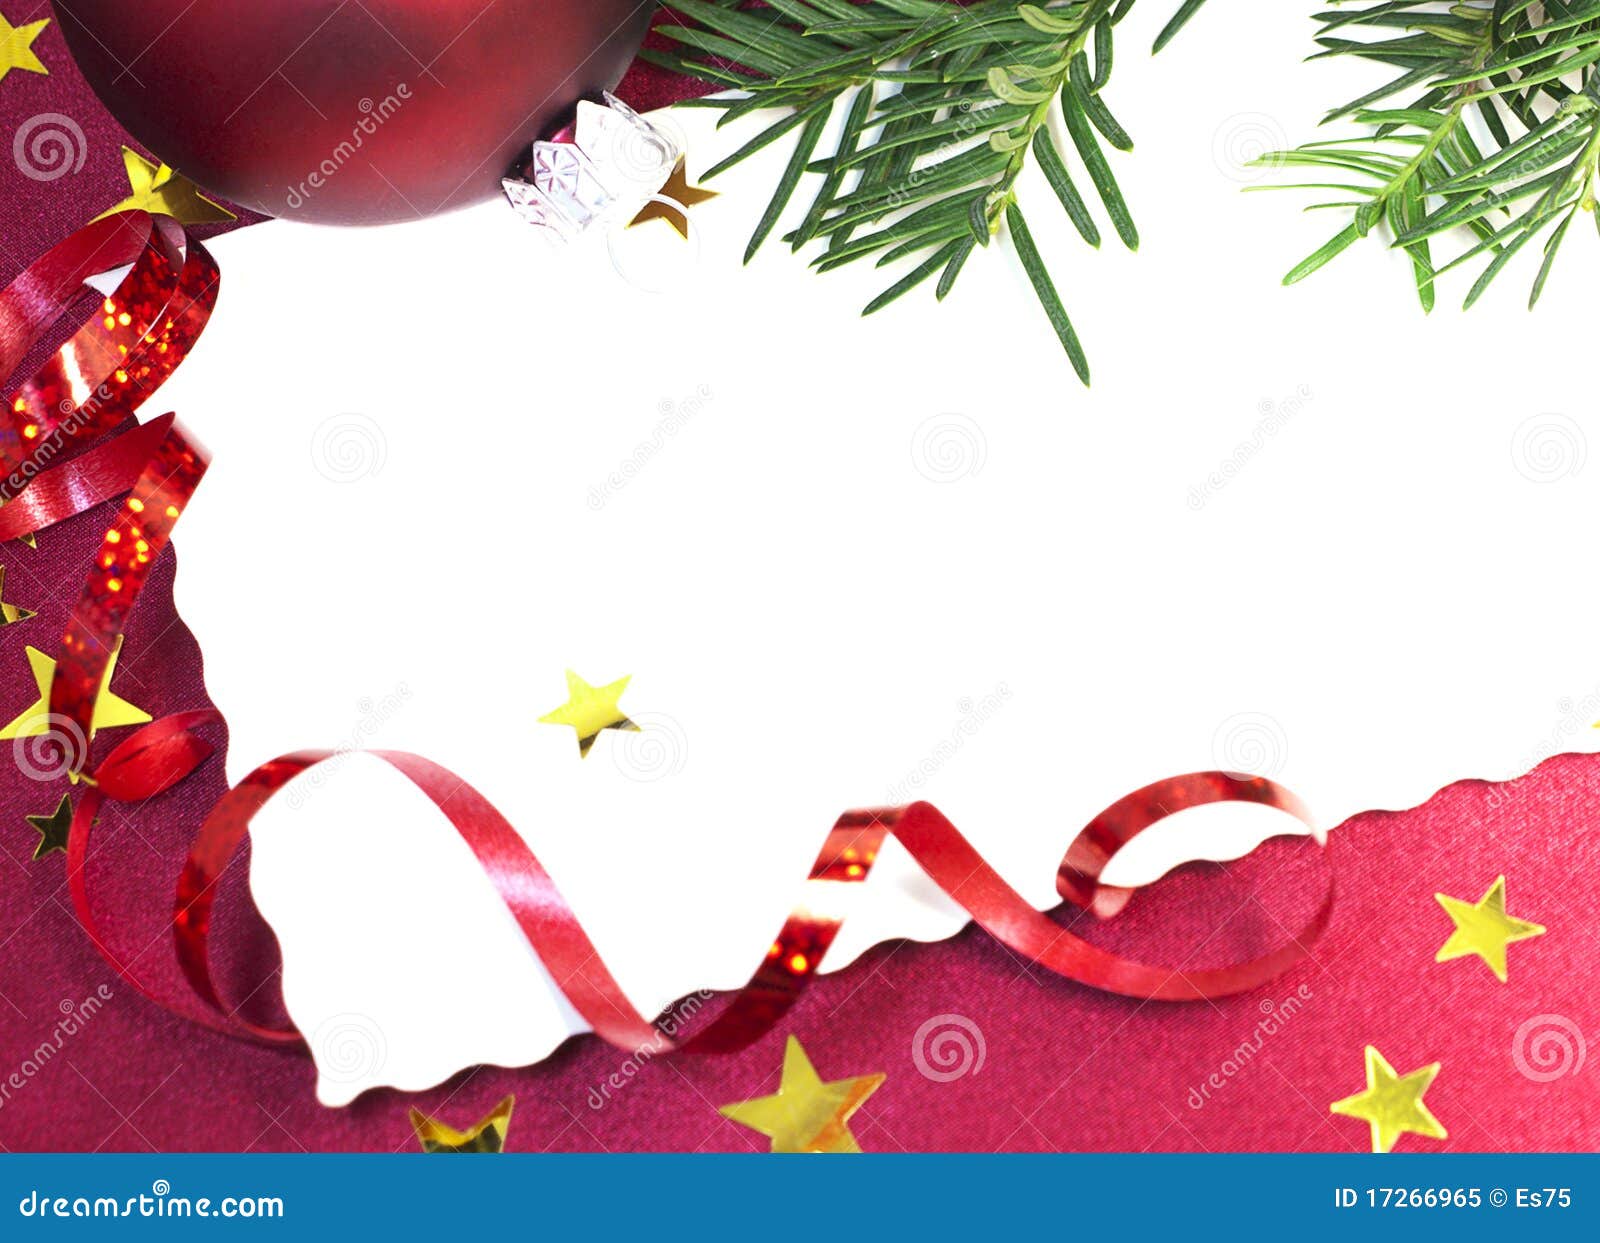 130,657 Christmas Invitation Stock Photos - Free & Royalty-Free Stock  Photos from Dreamstime